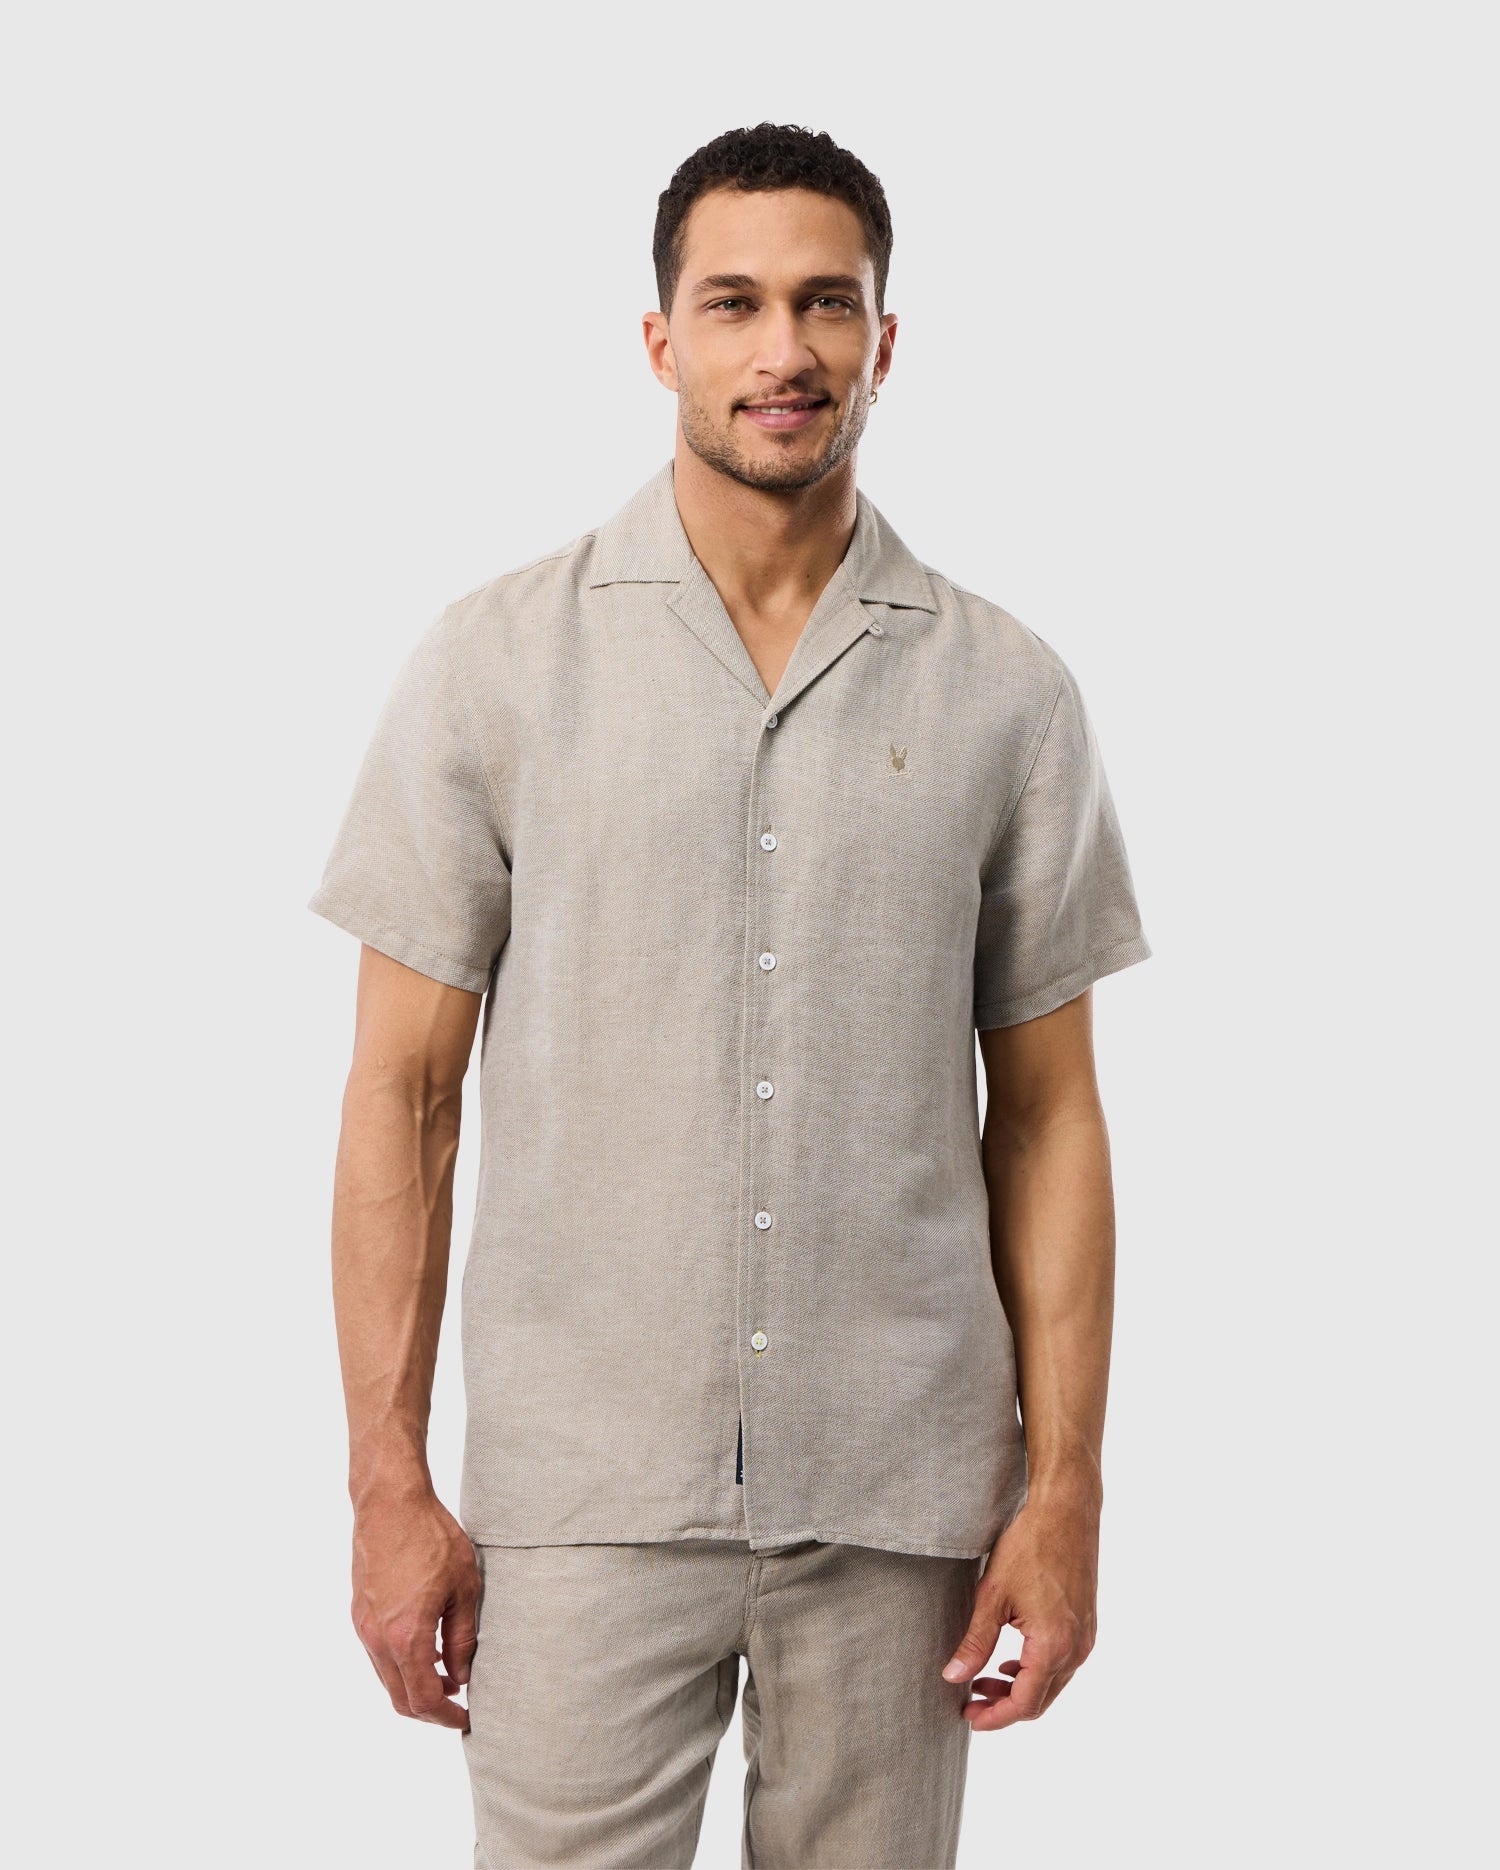 Man in a Psycho Bunny MENS WINDCREST LINEN BLEND SHORT SLEEVE SHIRT with an embroidered logo and matching pants standing against a white background, smiling slightly at the camera. He has a casual, well-groomed appearance.